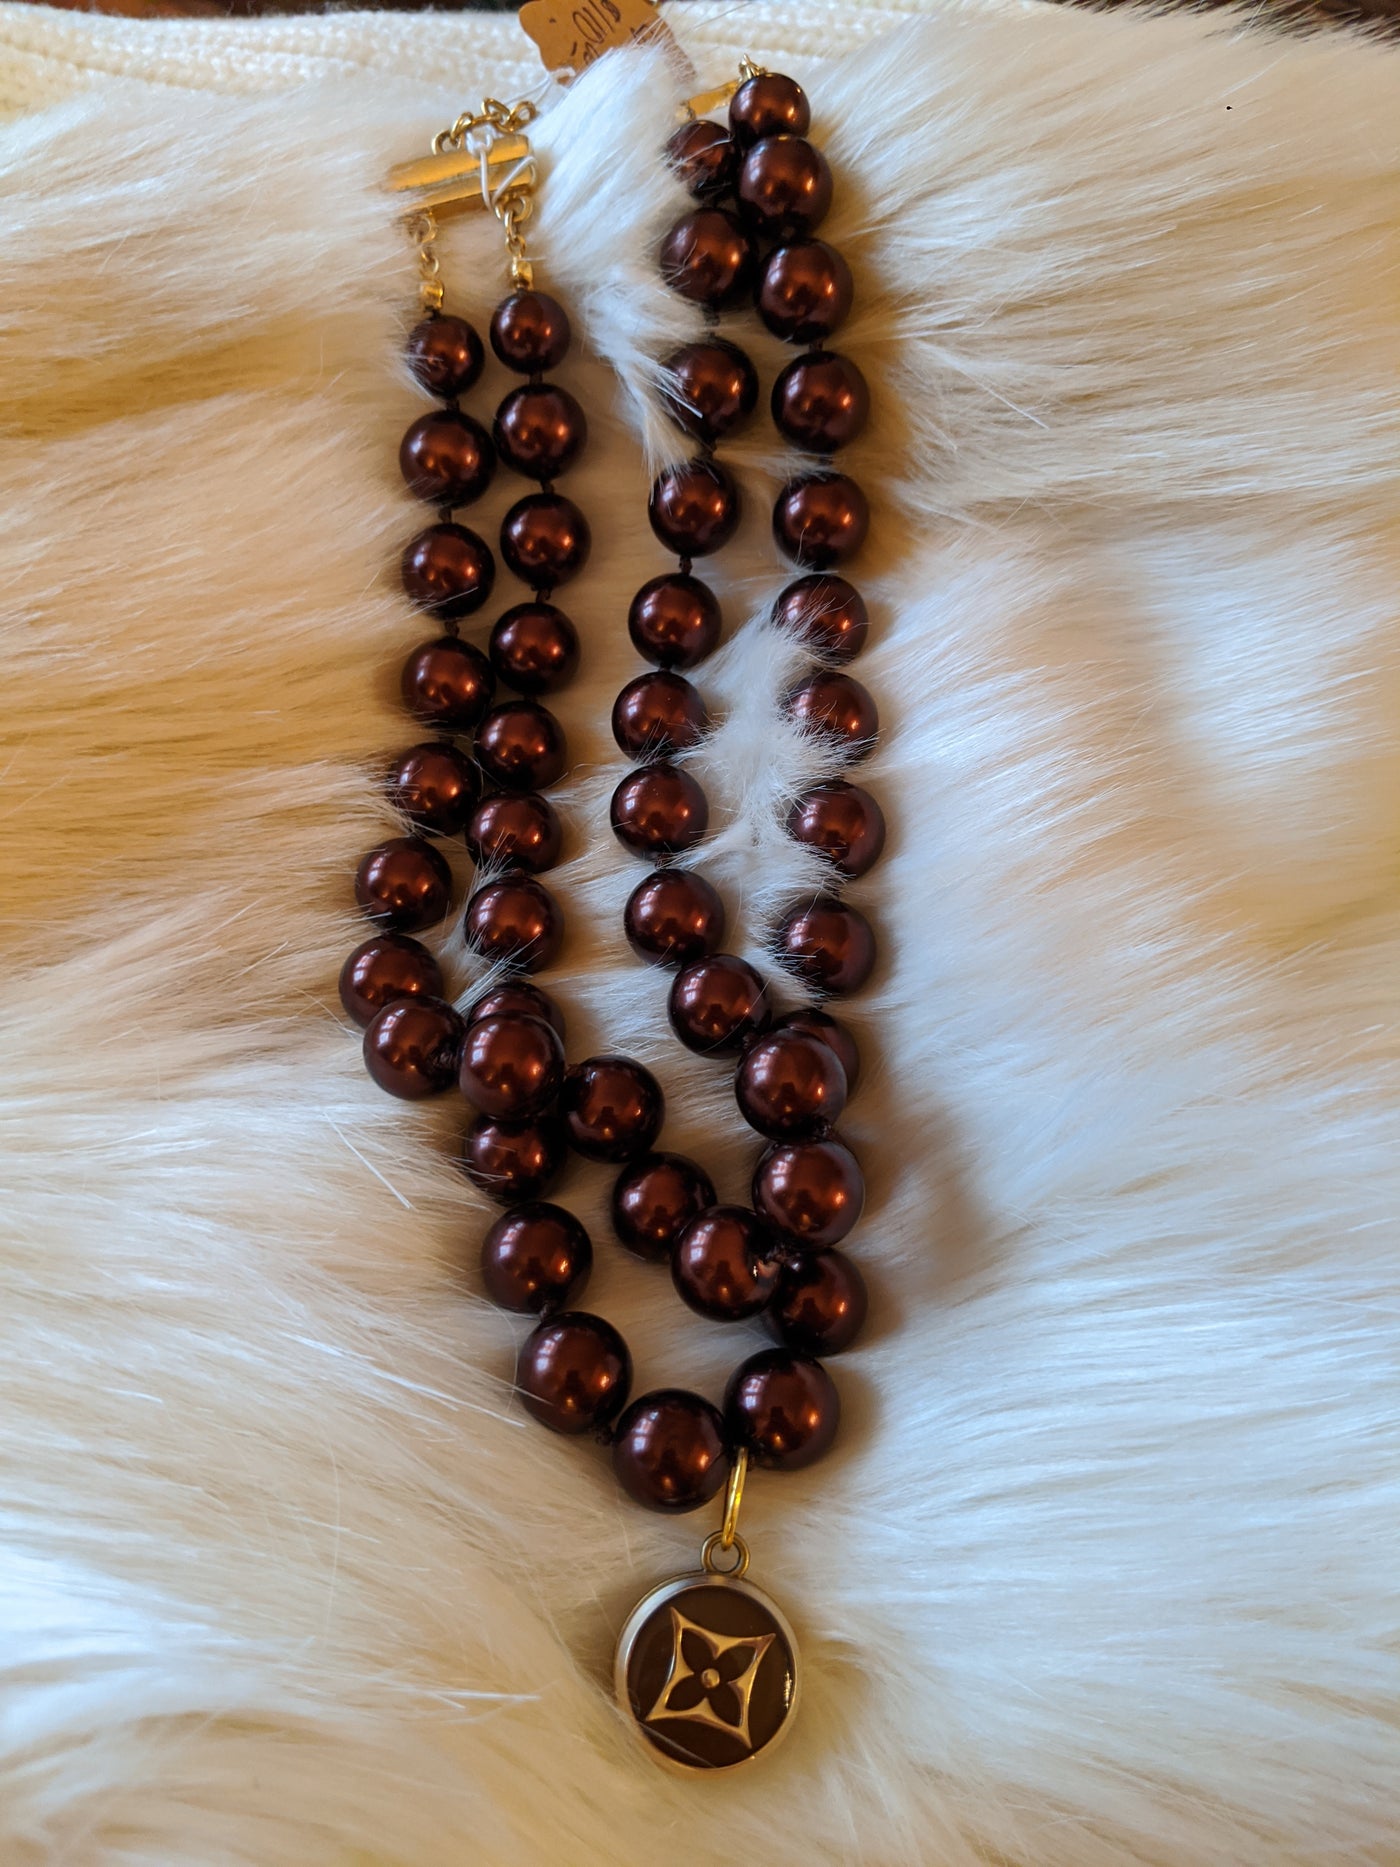 TS107 - Gucci on Vintage Chocolate Beads